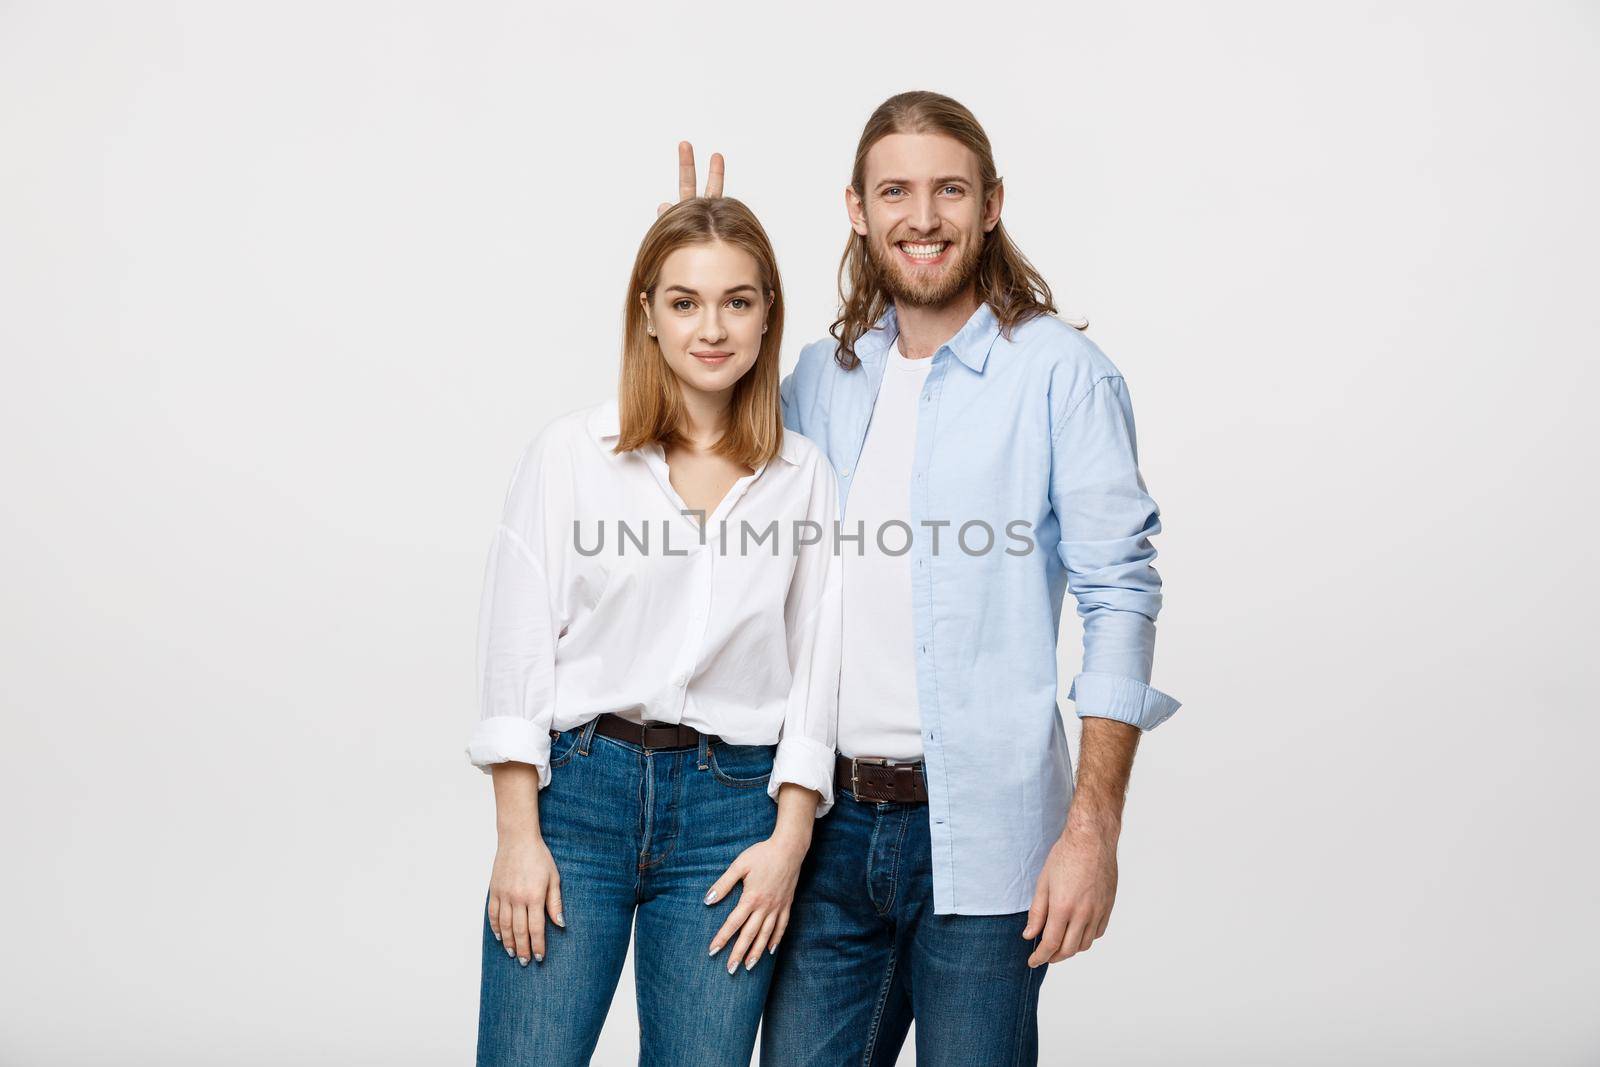 Portrait of lovely young couple showing peace or victory sign on white studio background.